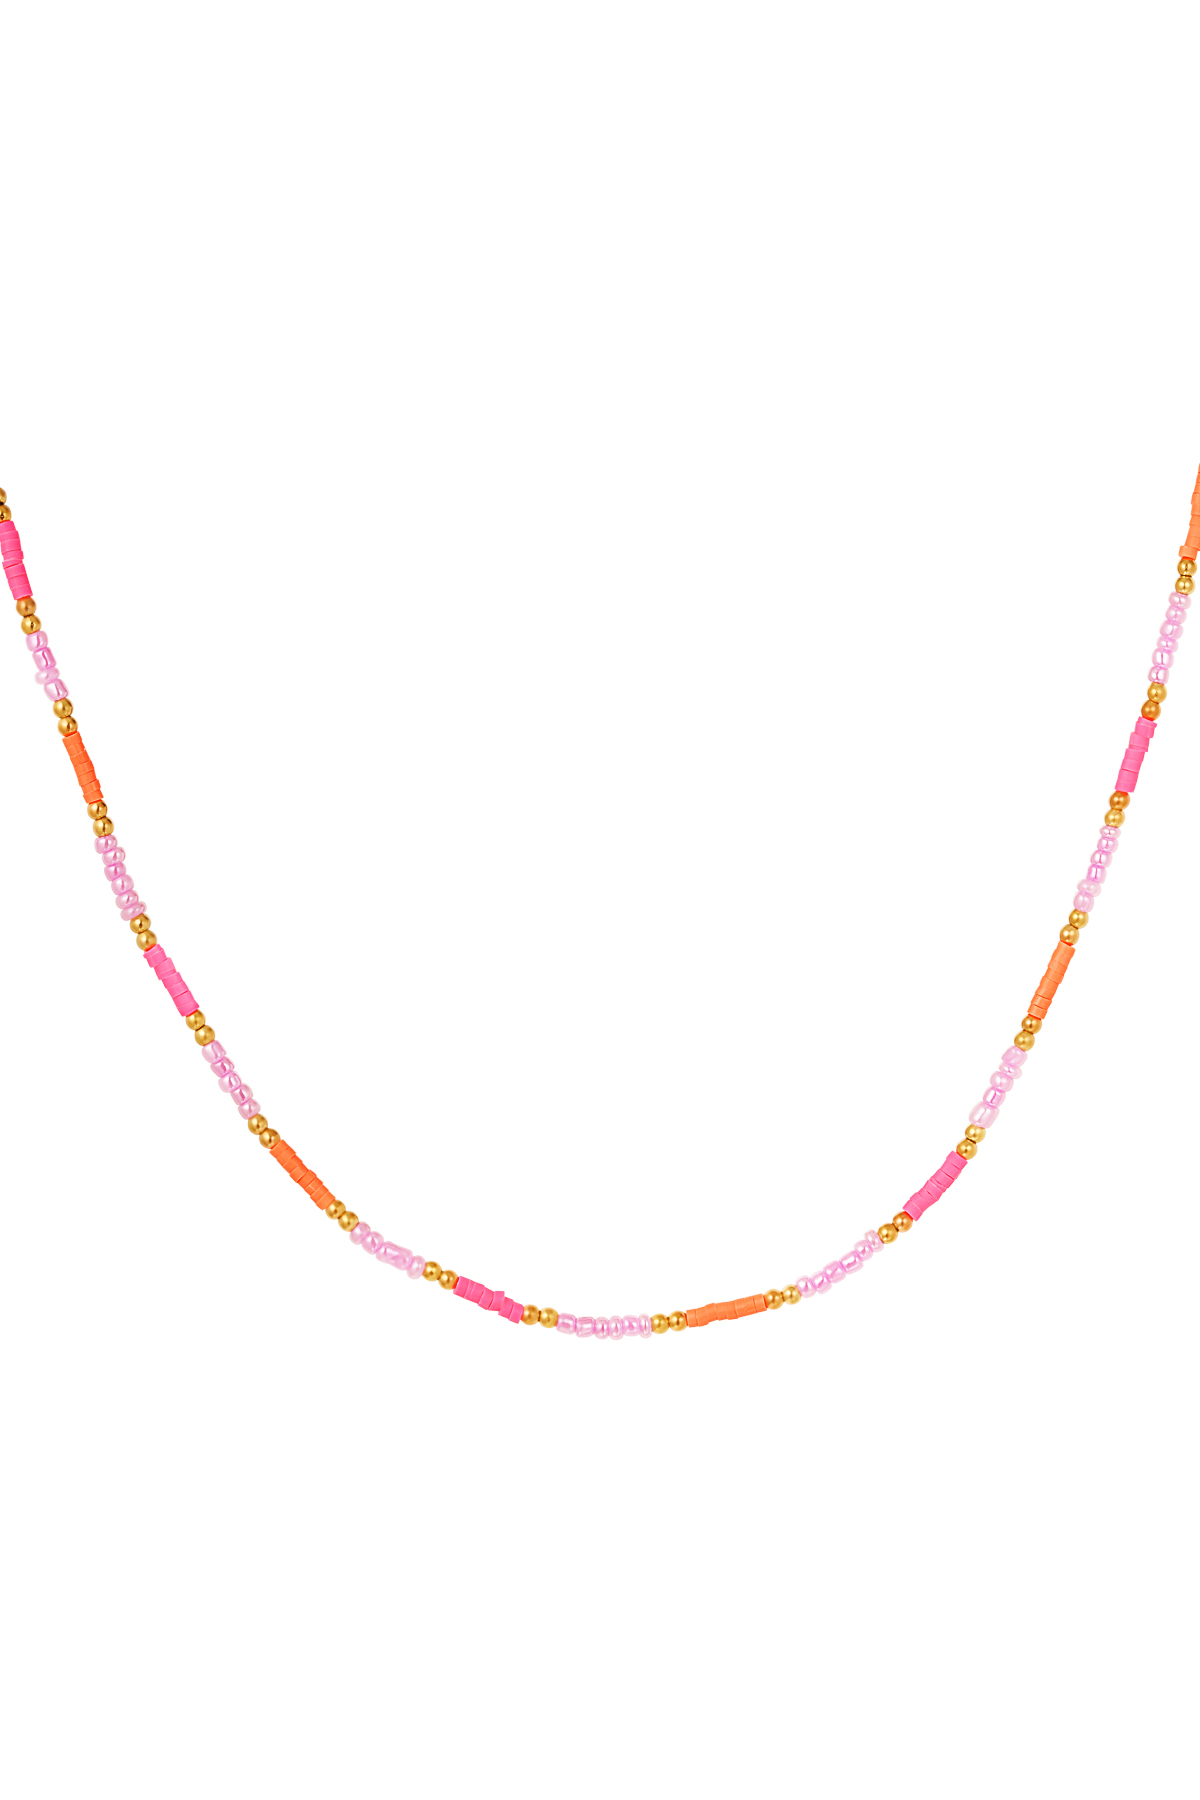 Necklace small colorful beads - pink/orange 